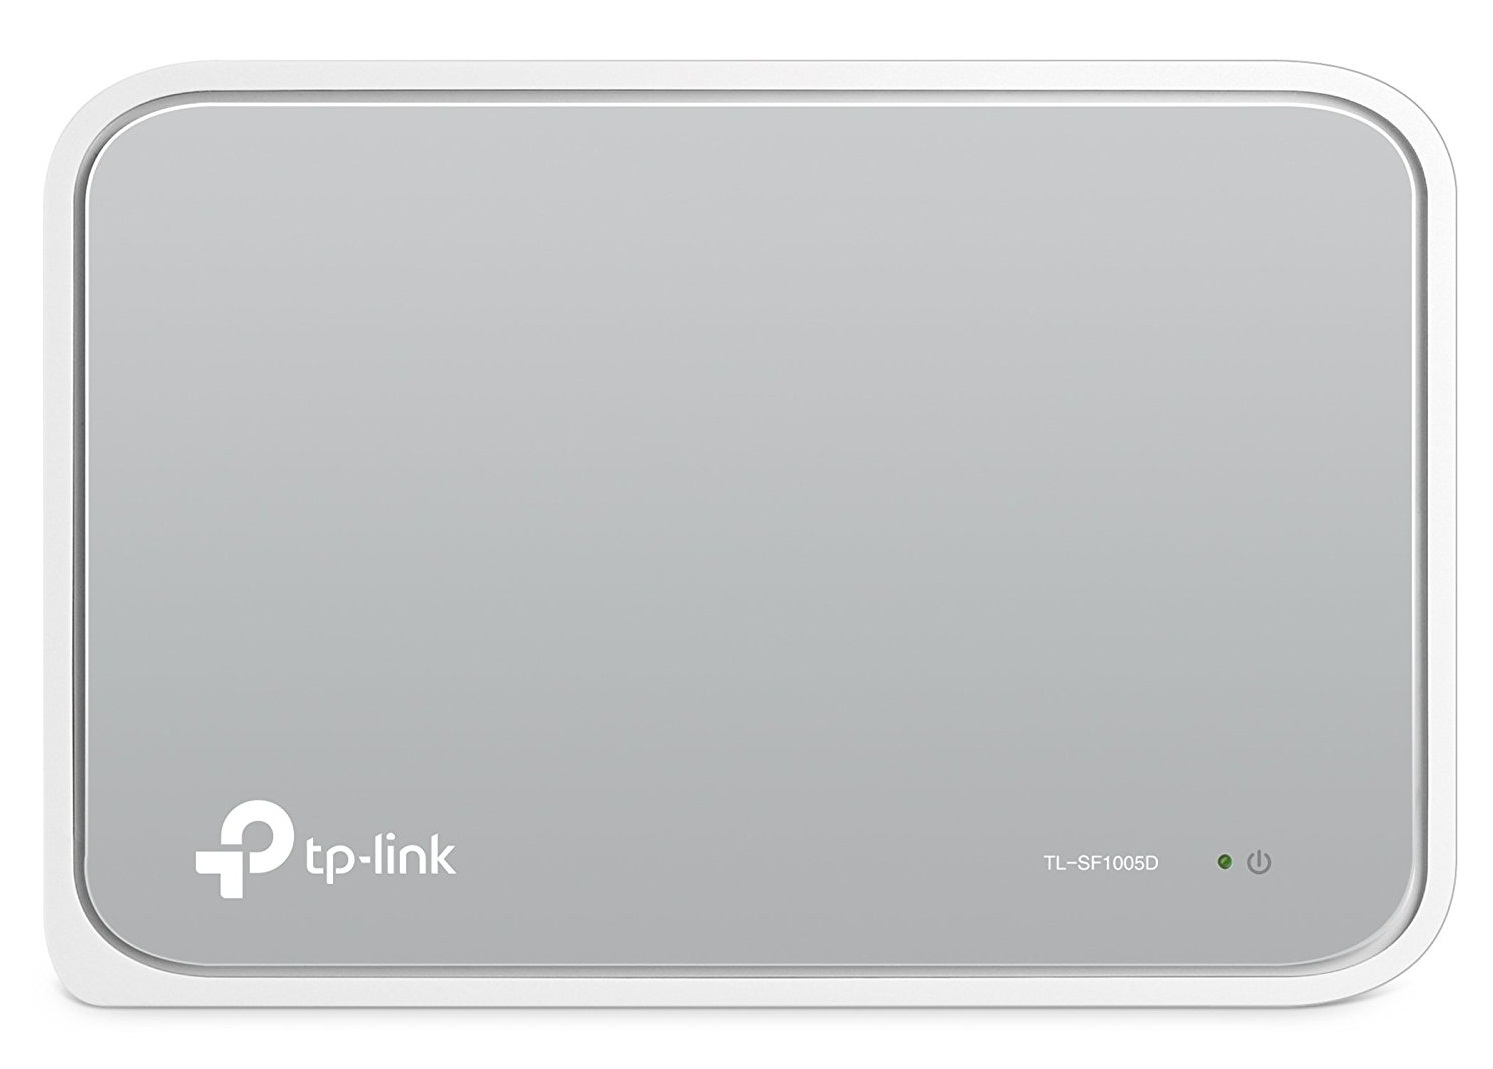 Tl-sf1005d tp-link 5x10/100 Unmanaged Switch - NA01